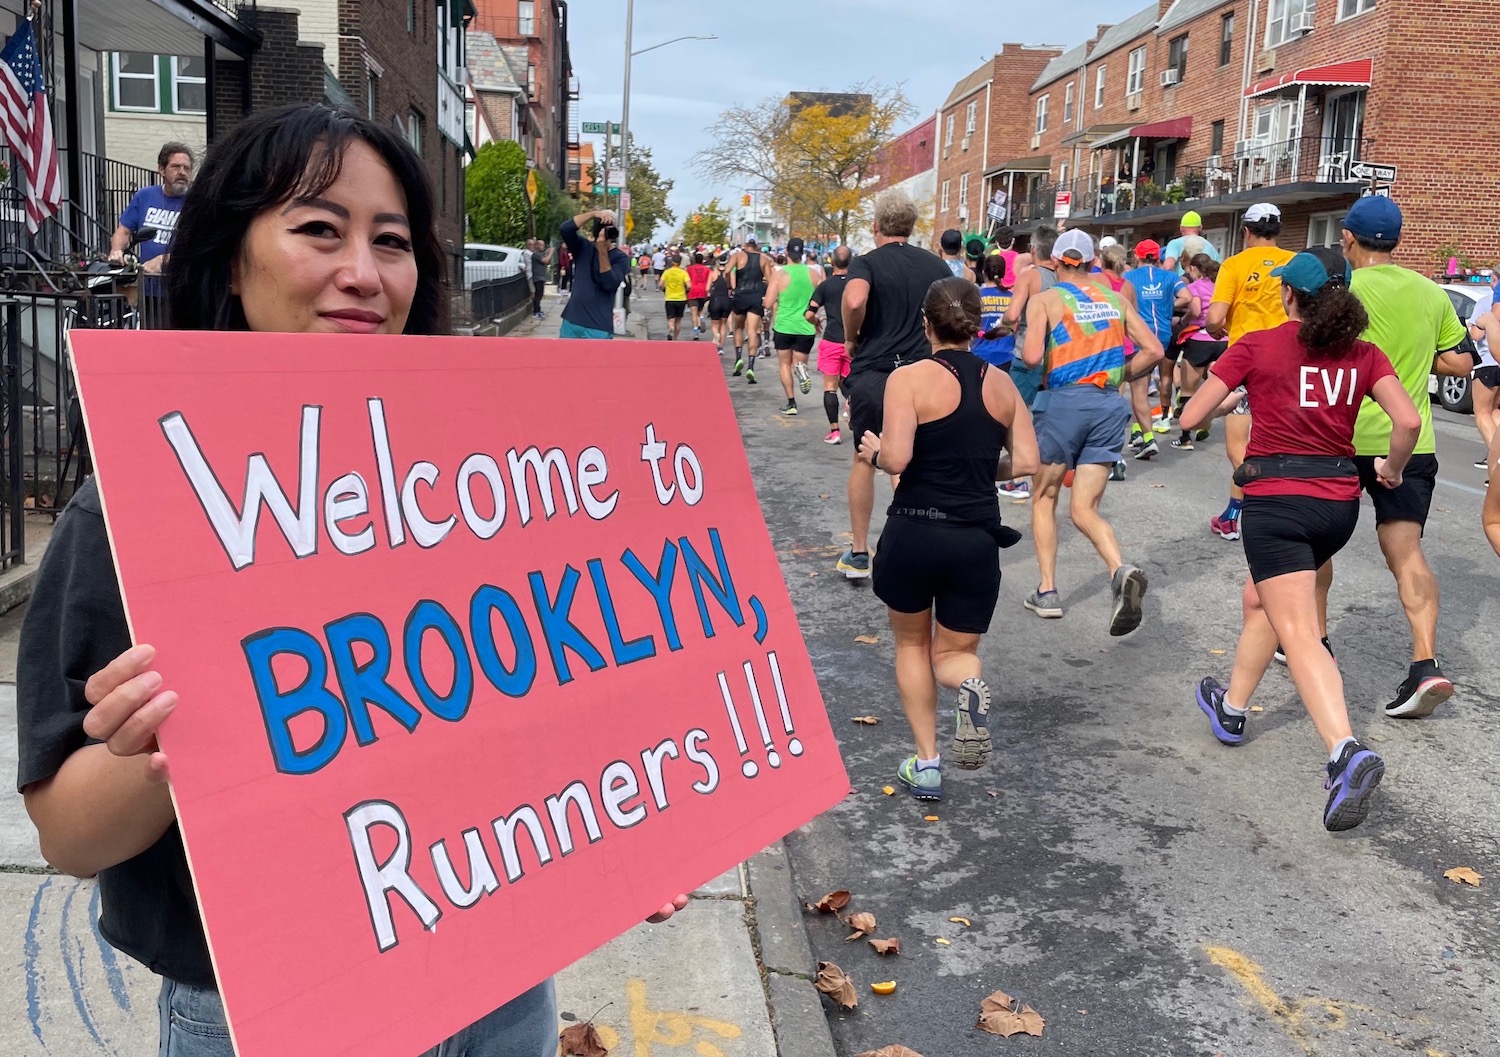 A woman holds a sign saying "Welcome to Brooklyn, runners" as marathon runners pass by on a street.